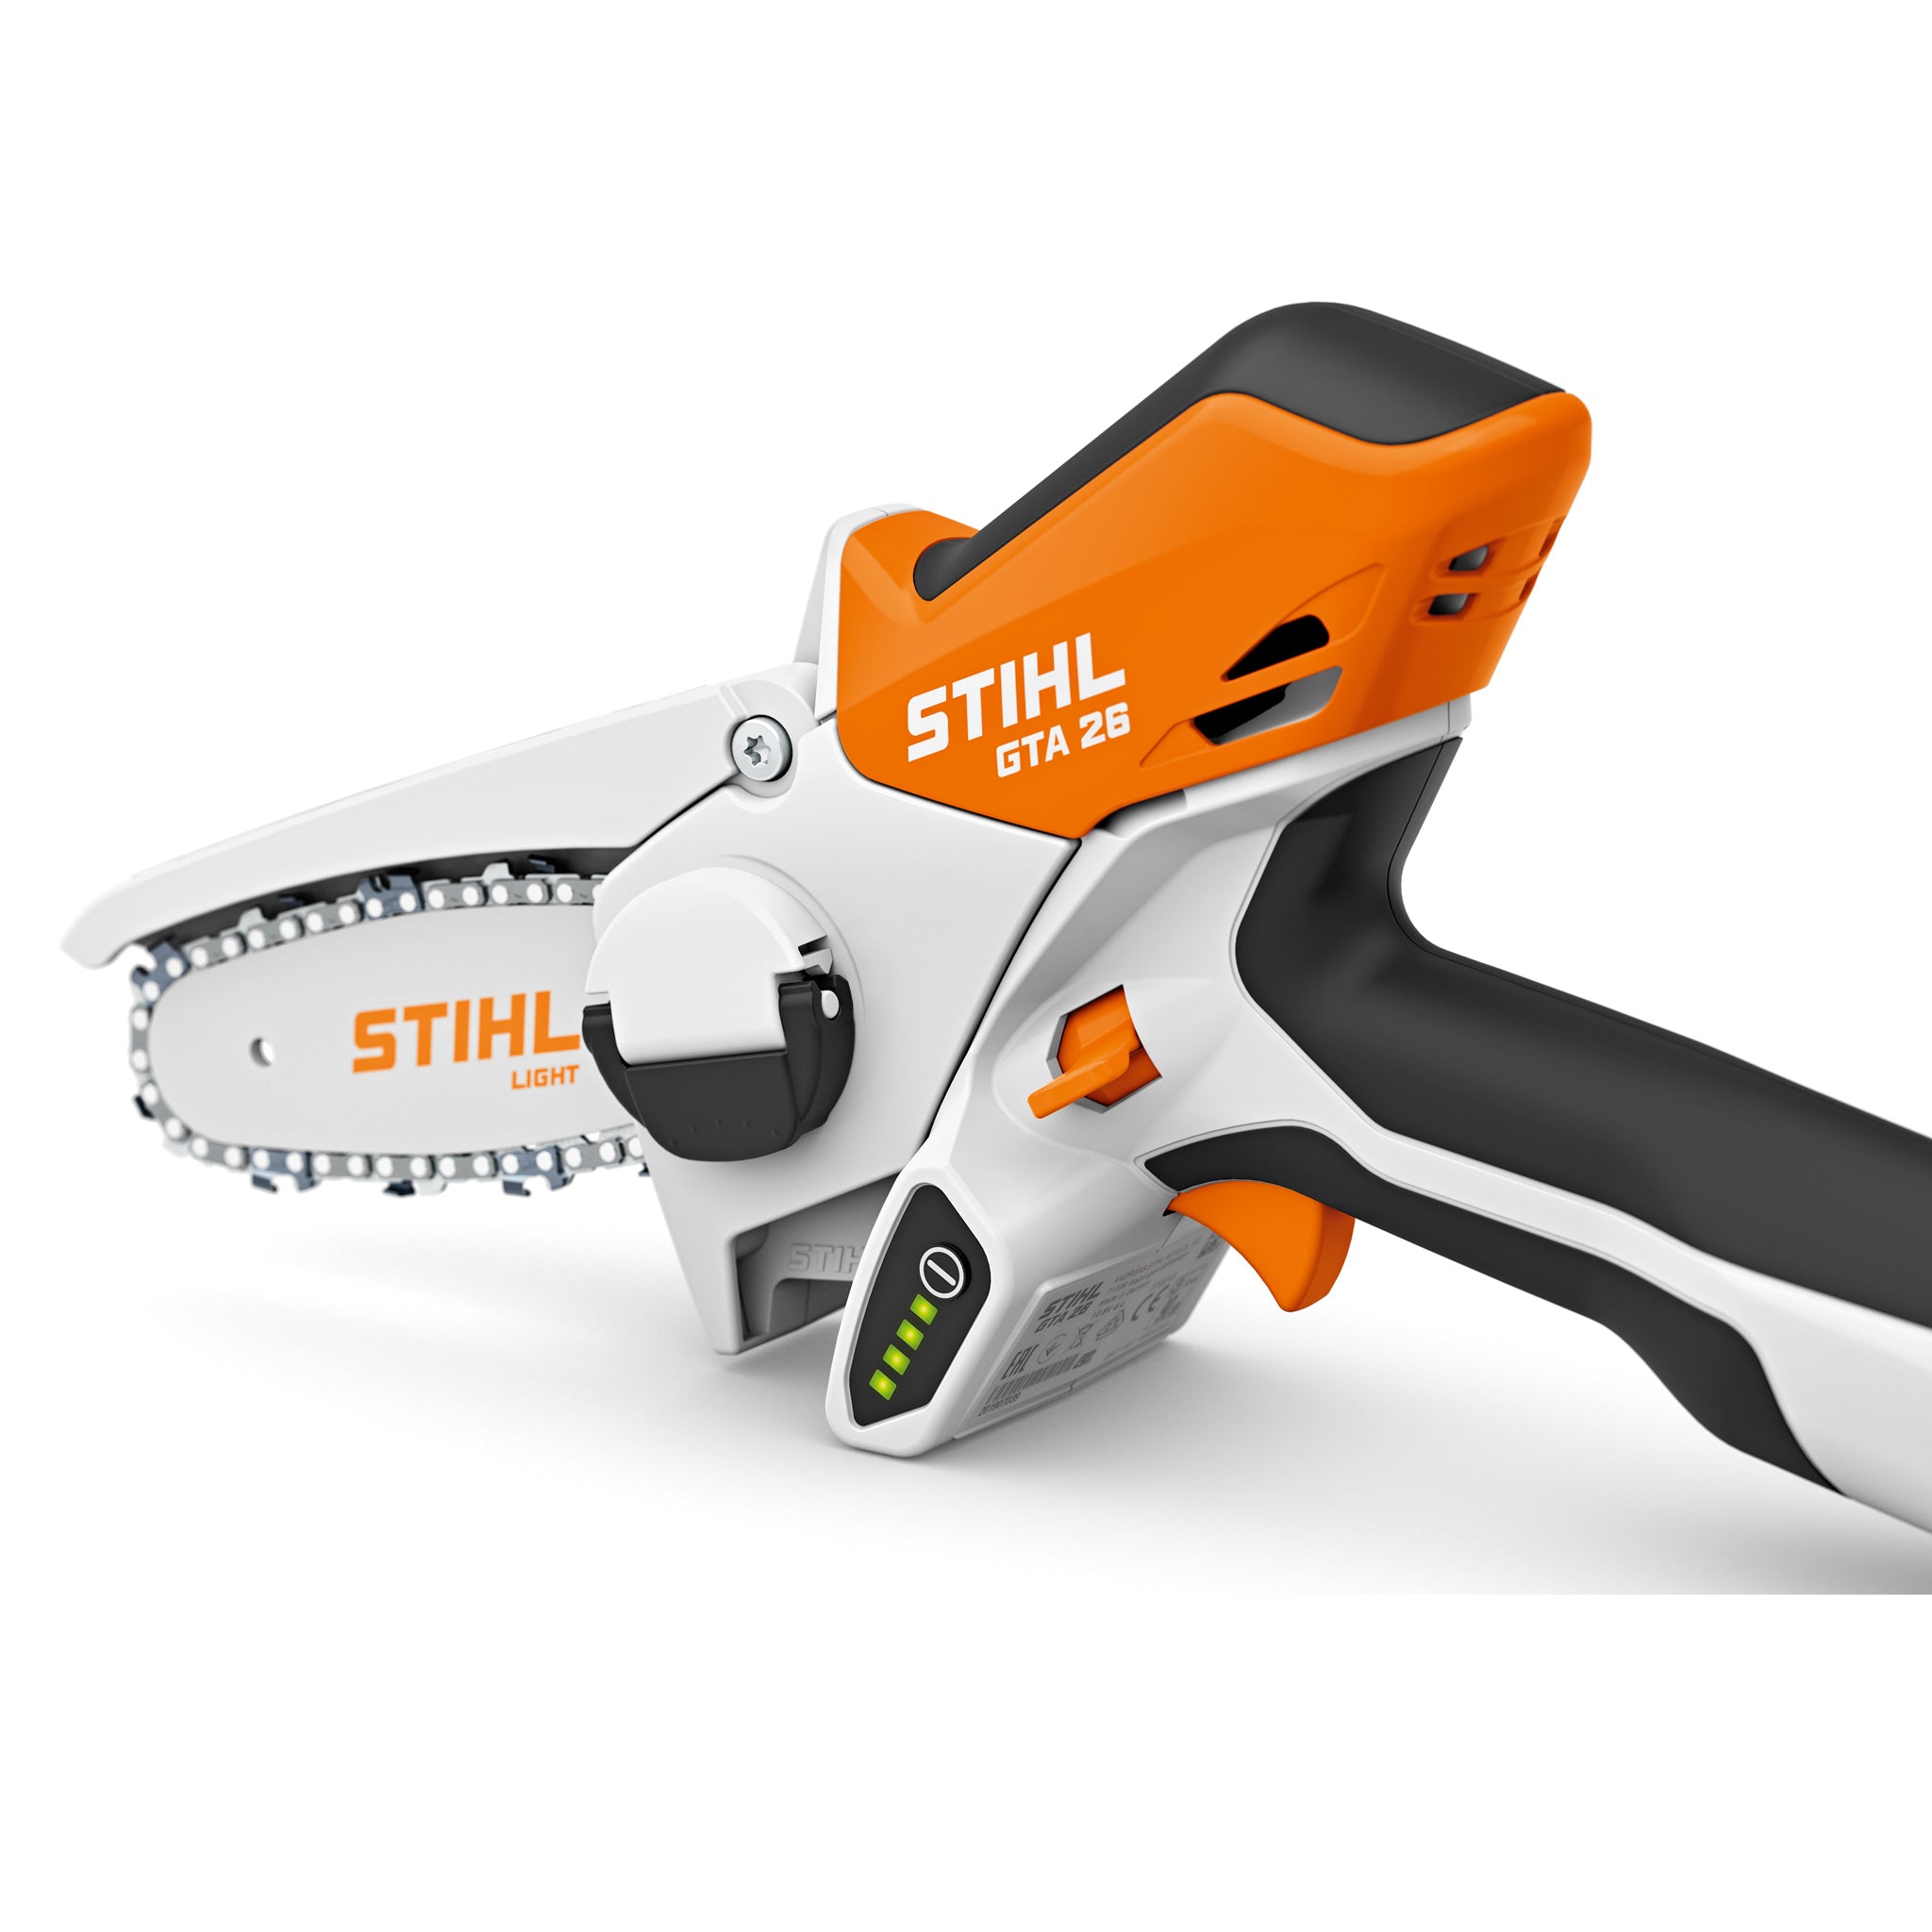 Stihl GTA 26 Pruner Handheld Chainsaw With Carrying Case Battery